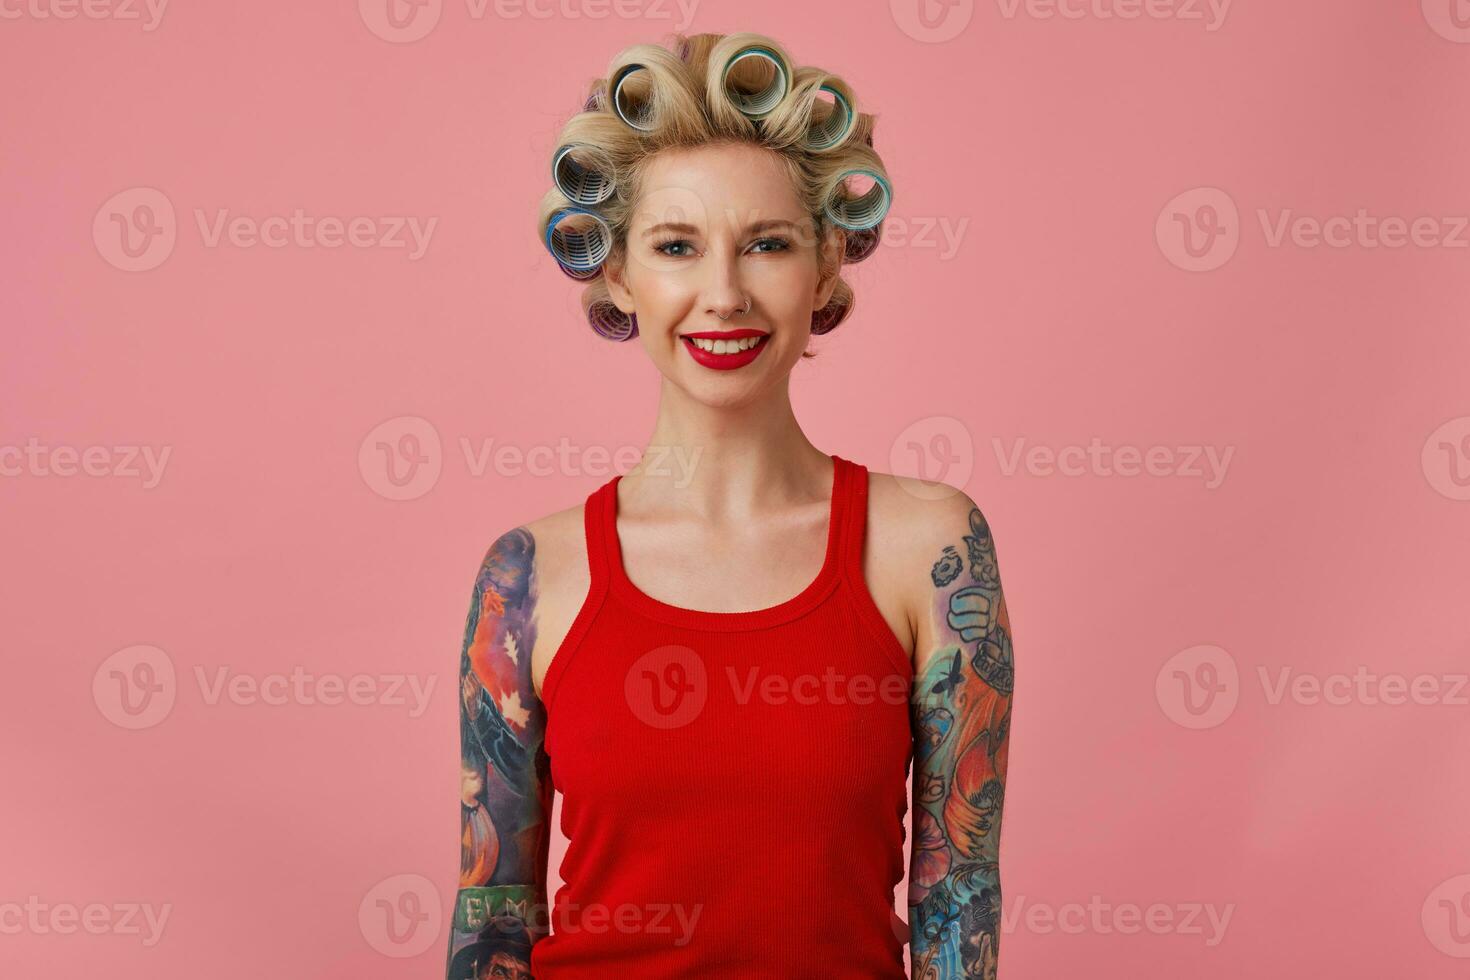 Indoor photo of young positive pretty blonde woman with tattooes having curlers on her head while standing over pink background, wearing festive makeup and preparing for evening going out